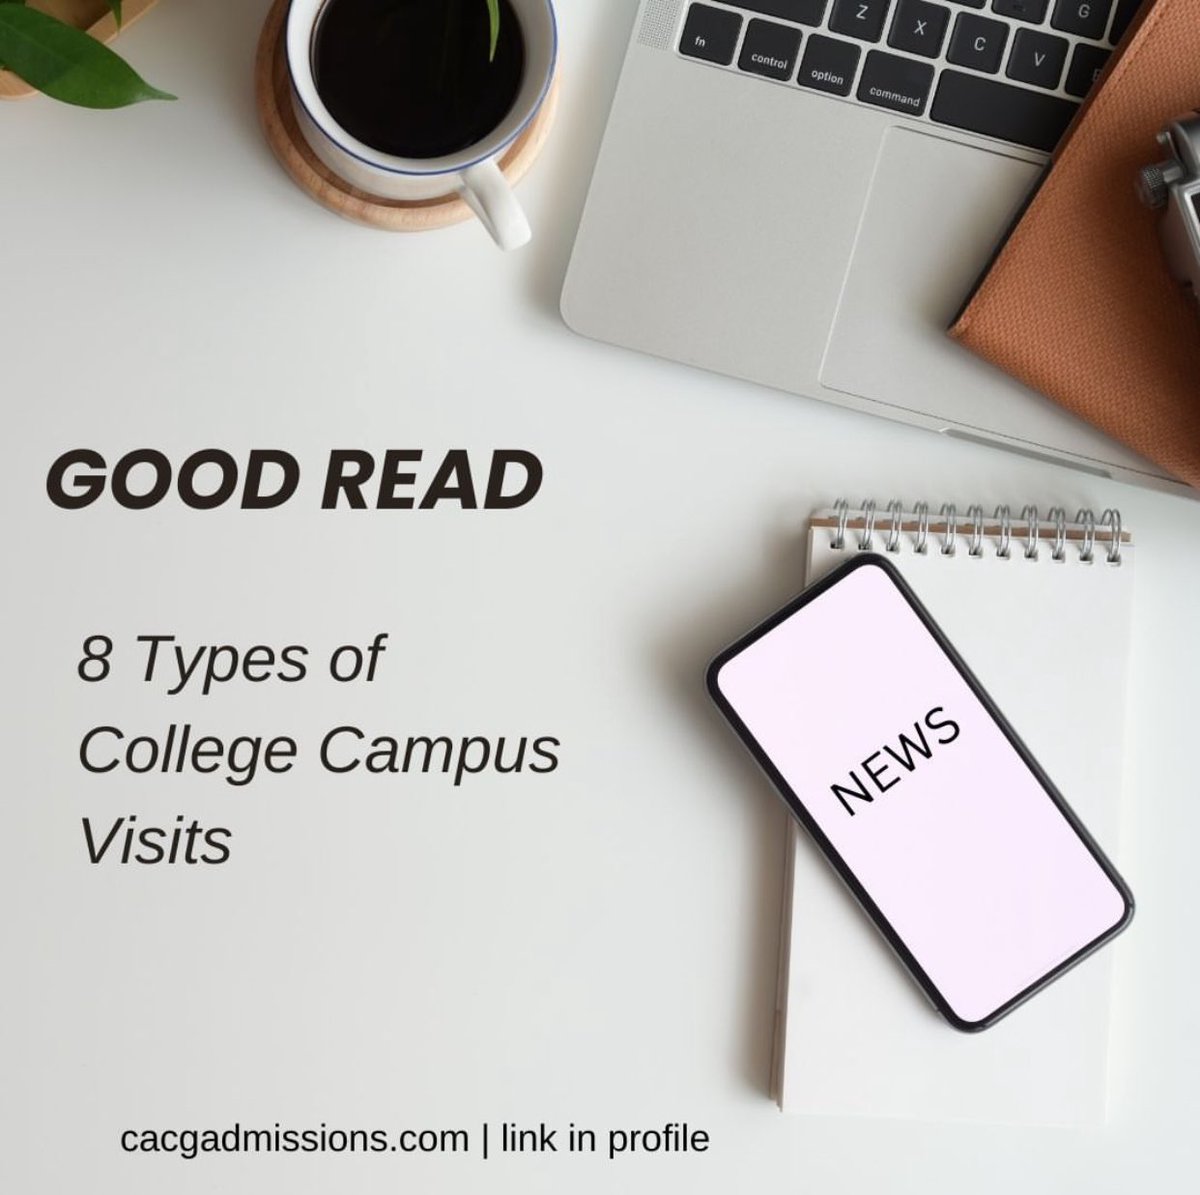 Campus tours can be self-guided, virtual or even on golf carts. bitly.ws/3fzEu #collegetips #college #collegestudent #collegeguidance #collegeadvice #collegebound #collegeapplications #actionsteps #workforit #collegefair #applyingtocollege #learningaboutcolleges